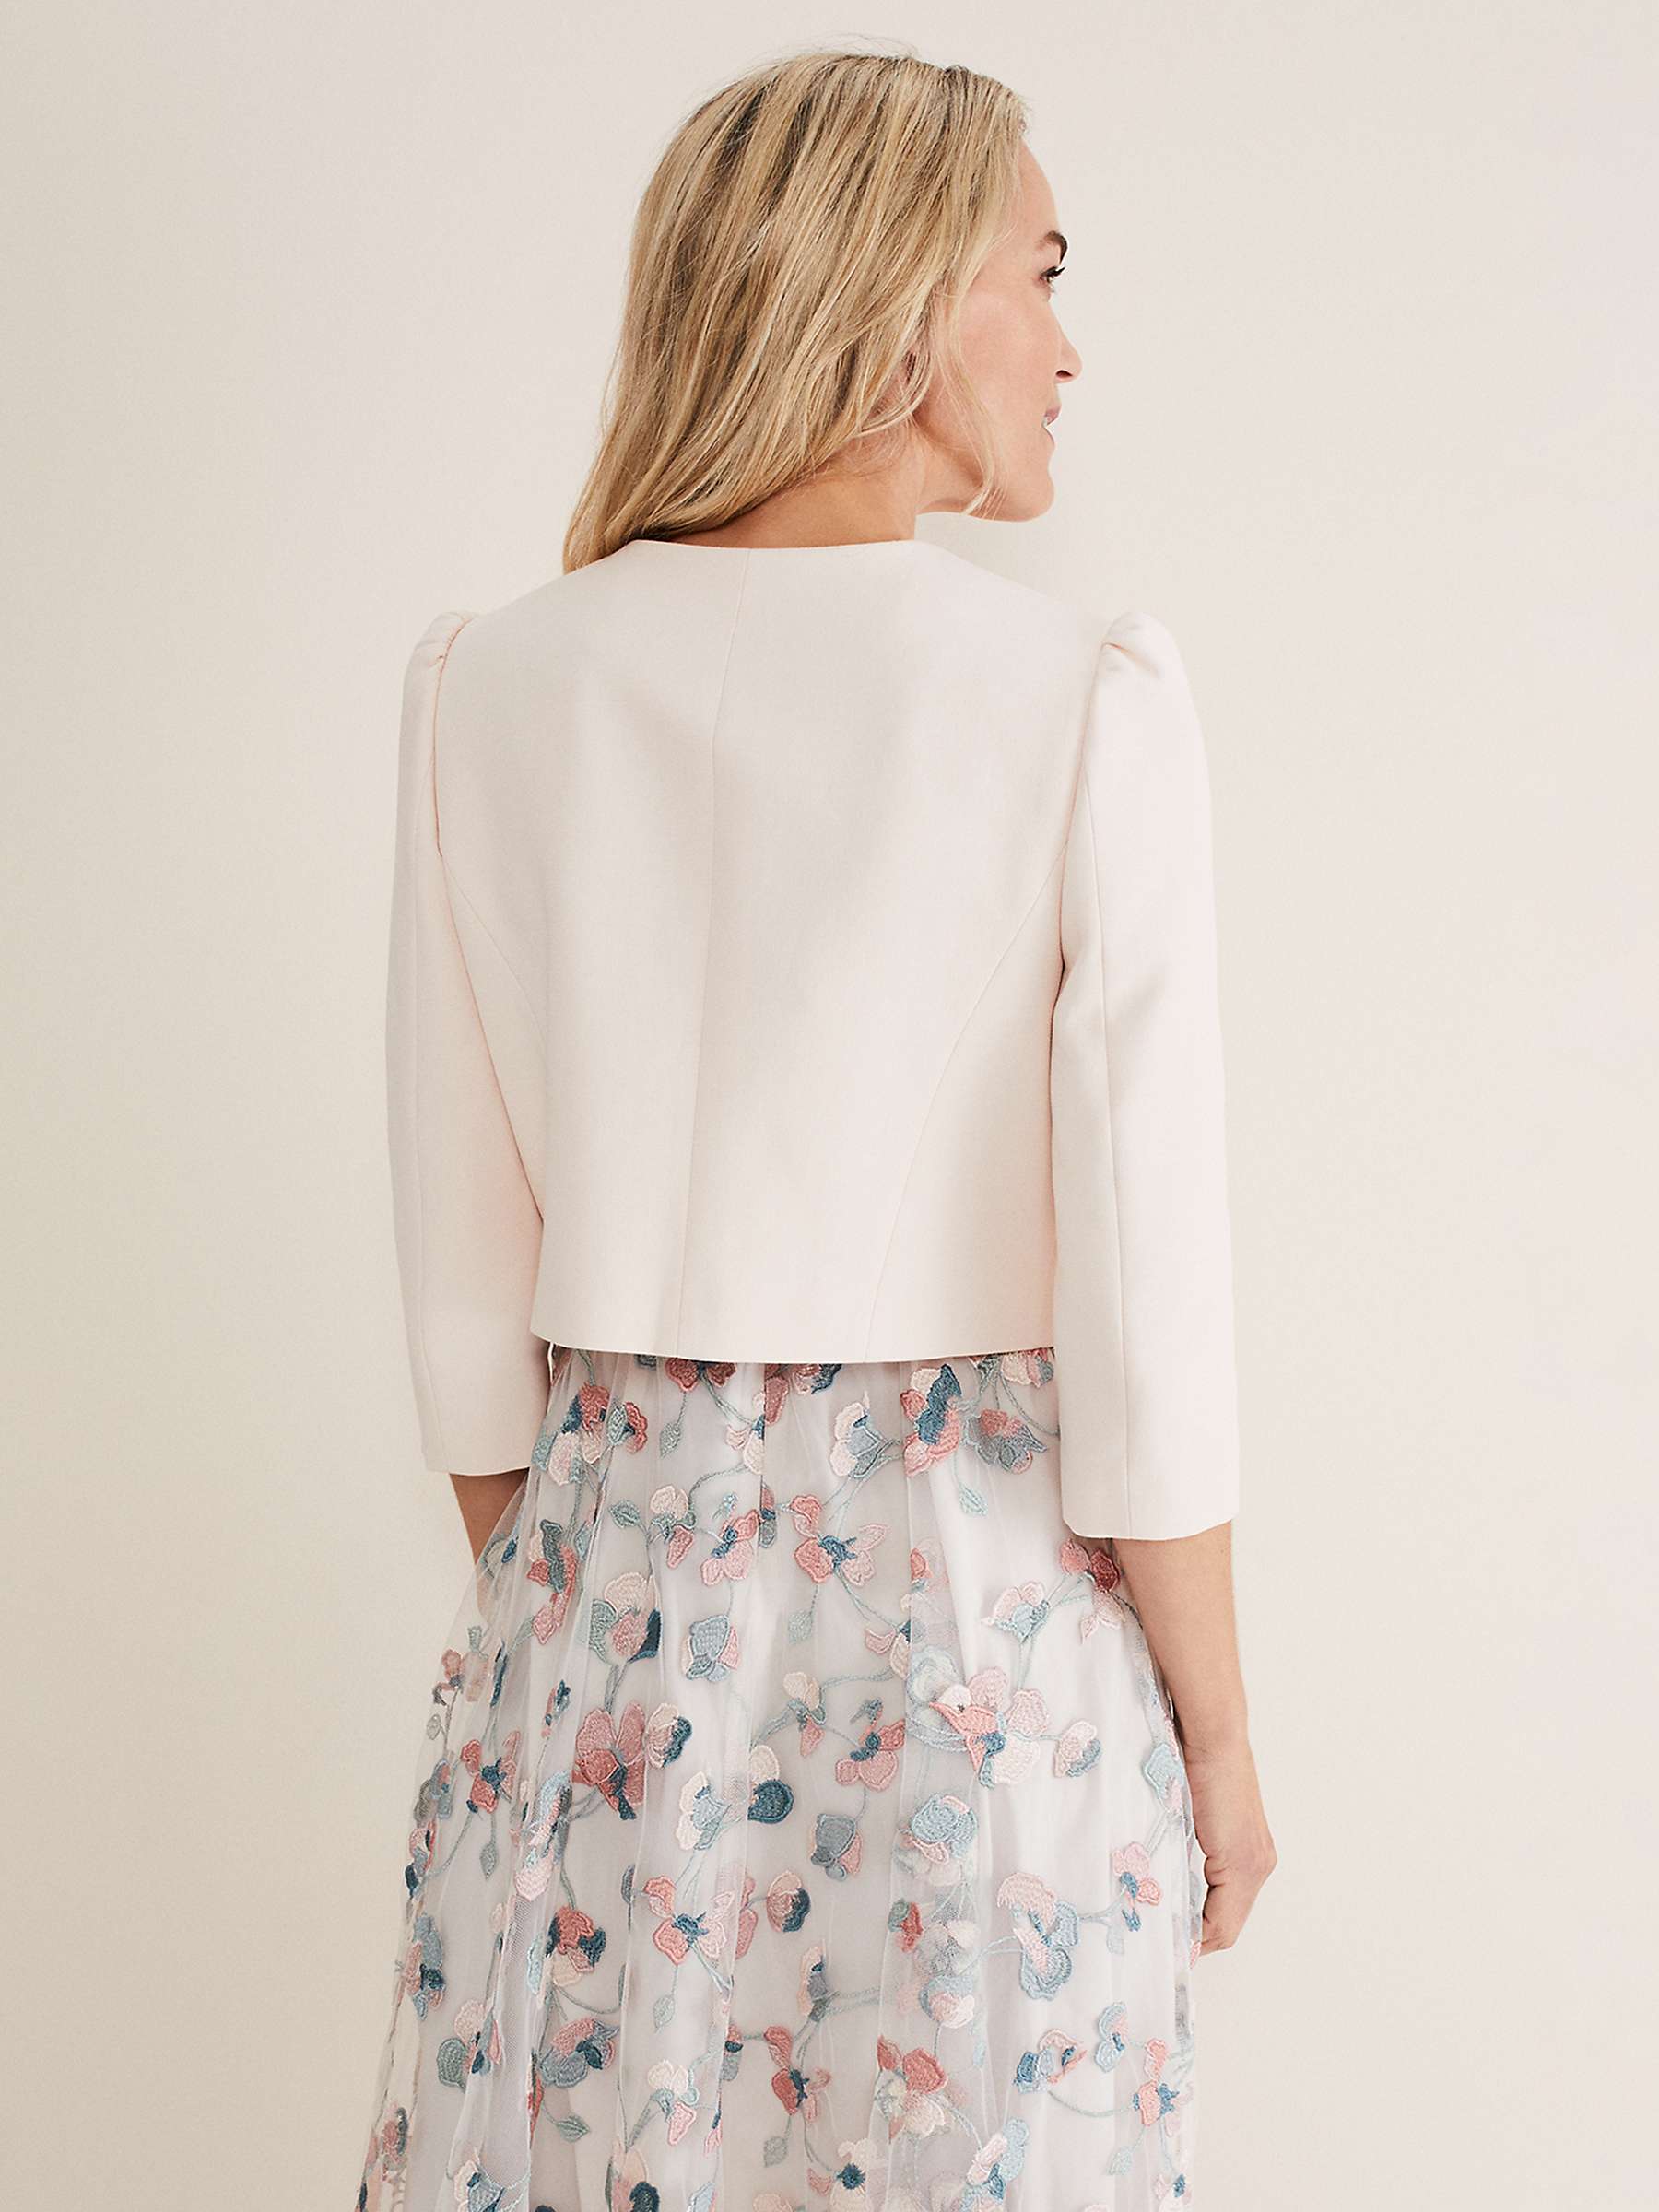 Buy Phase Eight Candace Pocket Jacket, Oyster Online at johnlewis.com